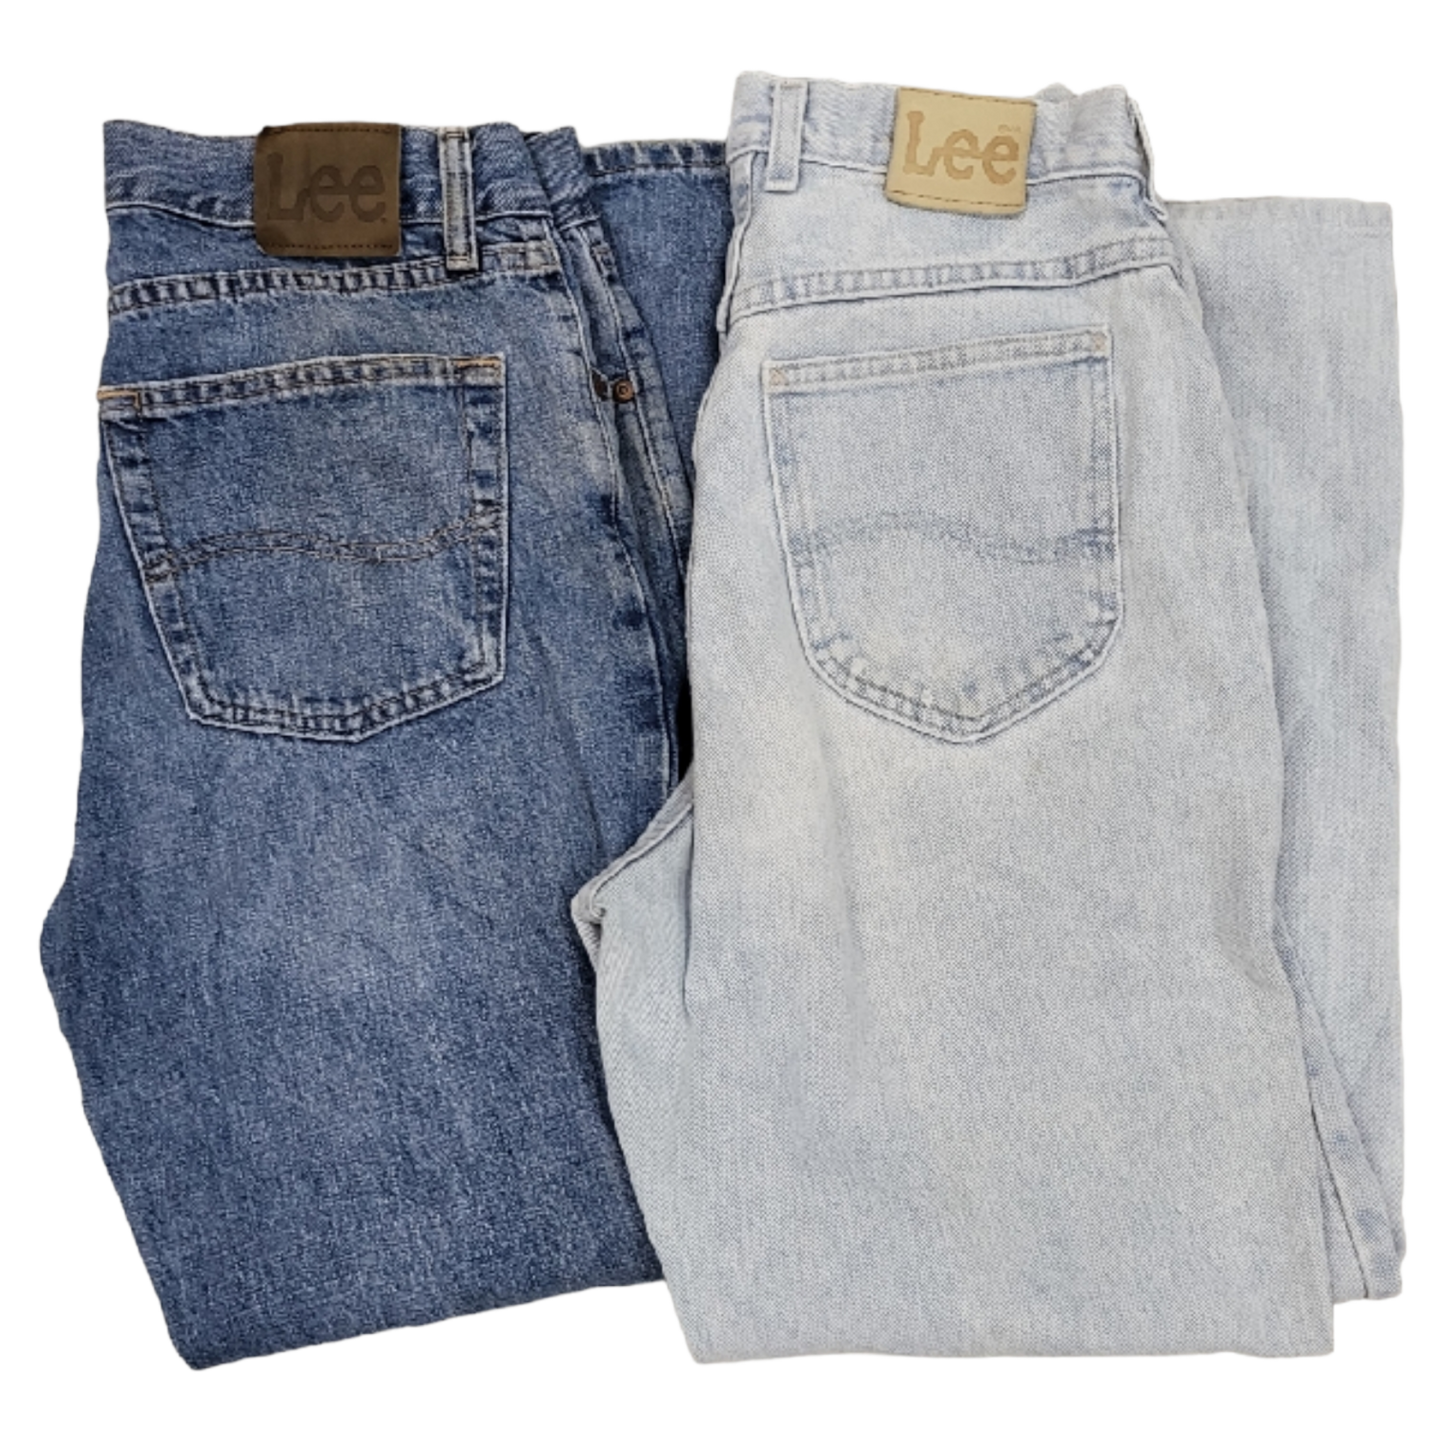 Women's Lee Jeans Intro Pack